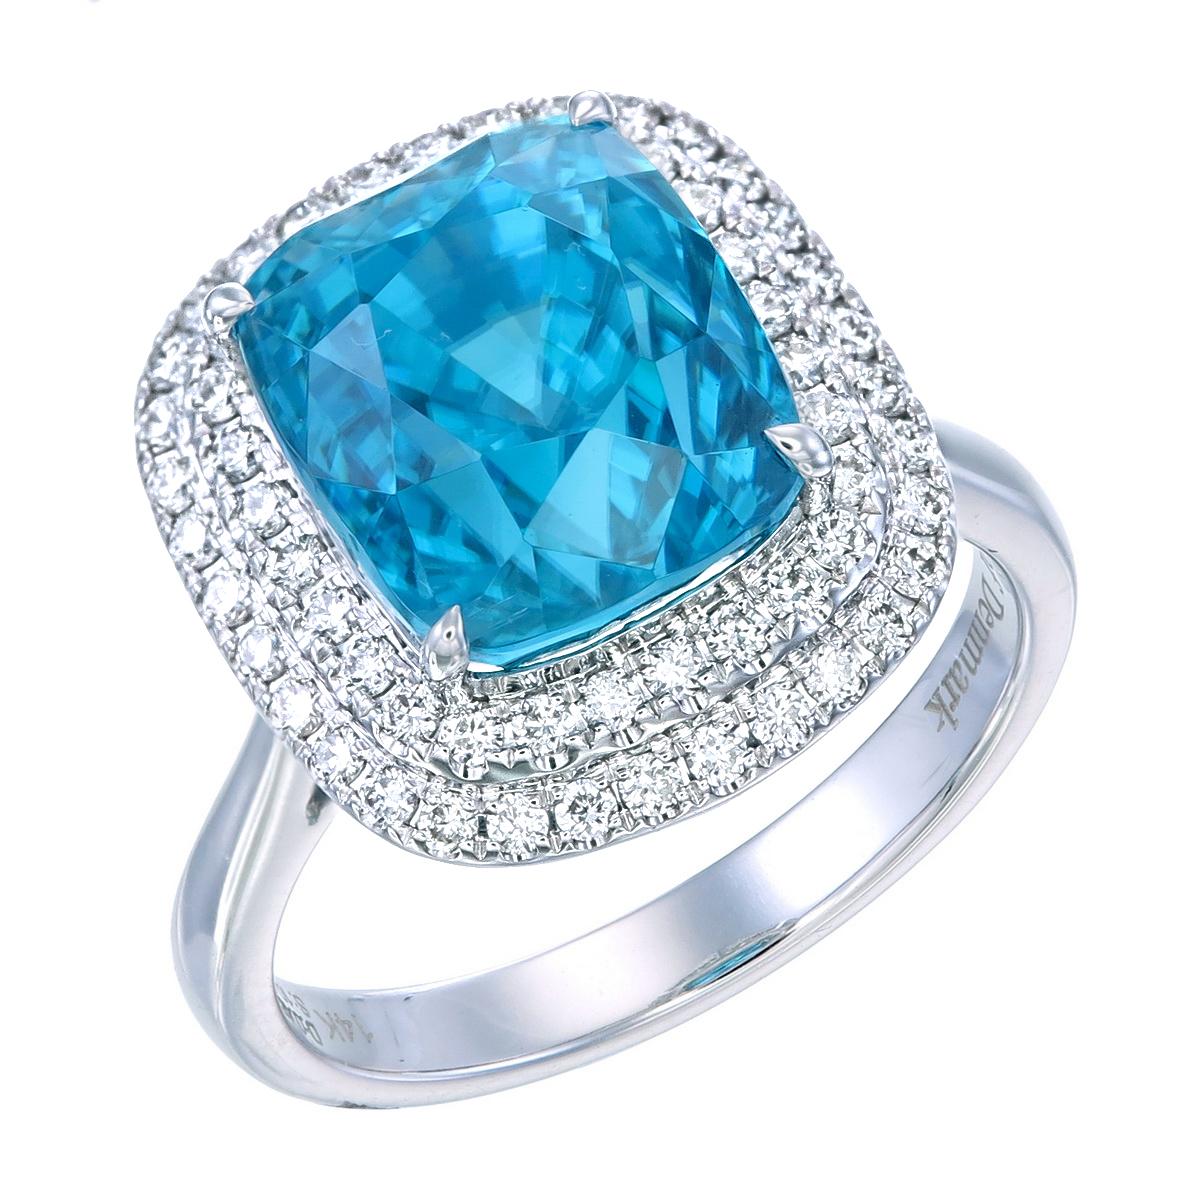 Natural Ocean Blue Zircon Cocktail Ring.
This ring features a 10.04 carat ocean blue zircon fully enveloped with a double row of SI1 diamond halos creating a classy contour brimming with charm and glamor.
14 Karat White Gold has been used to fashion